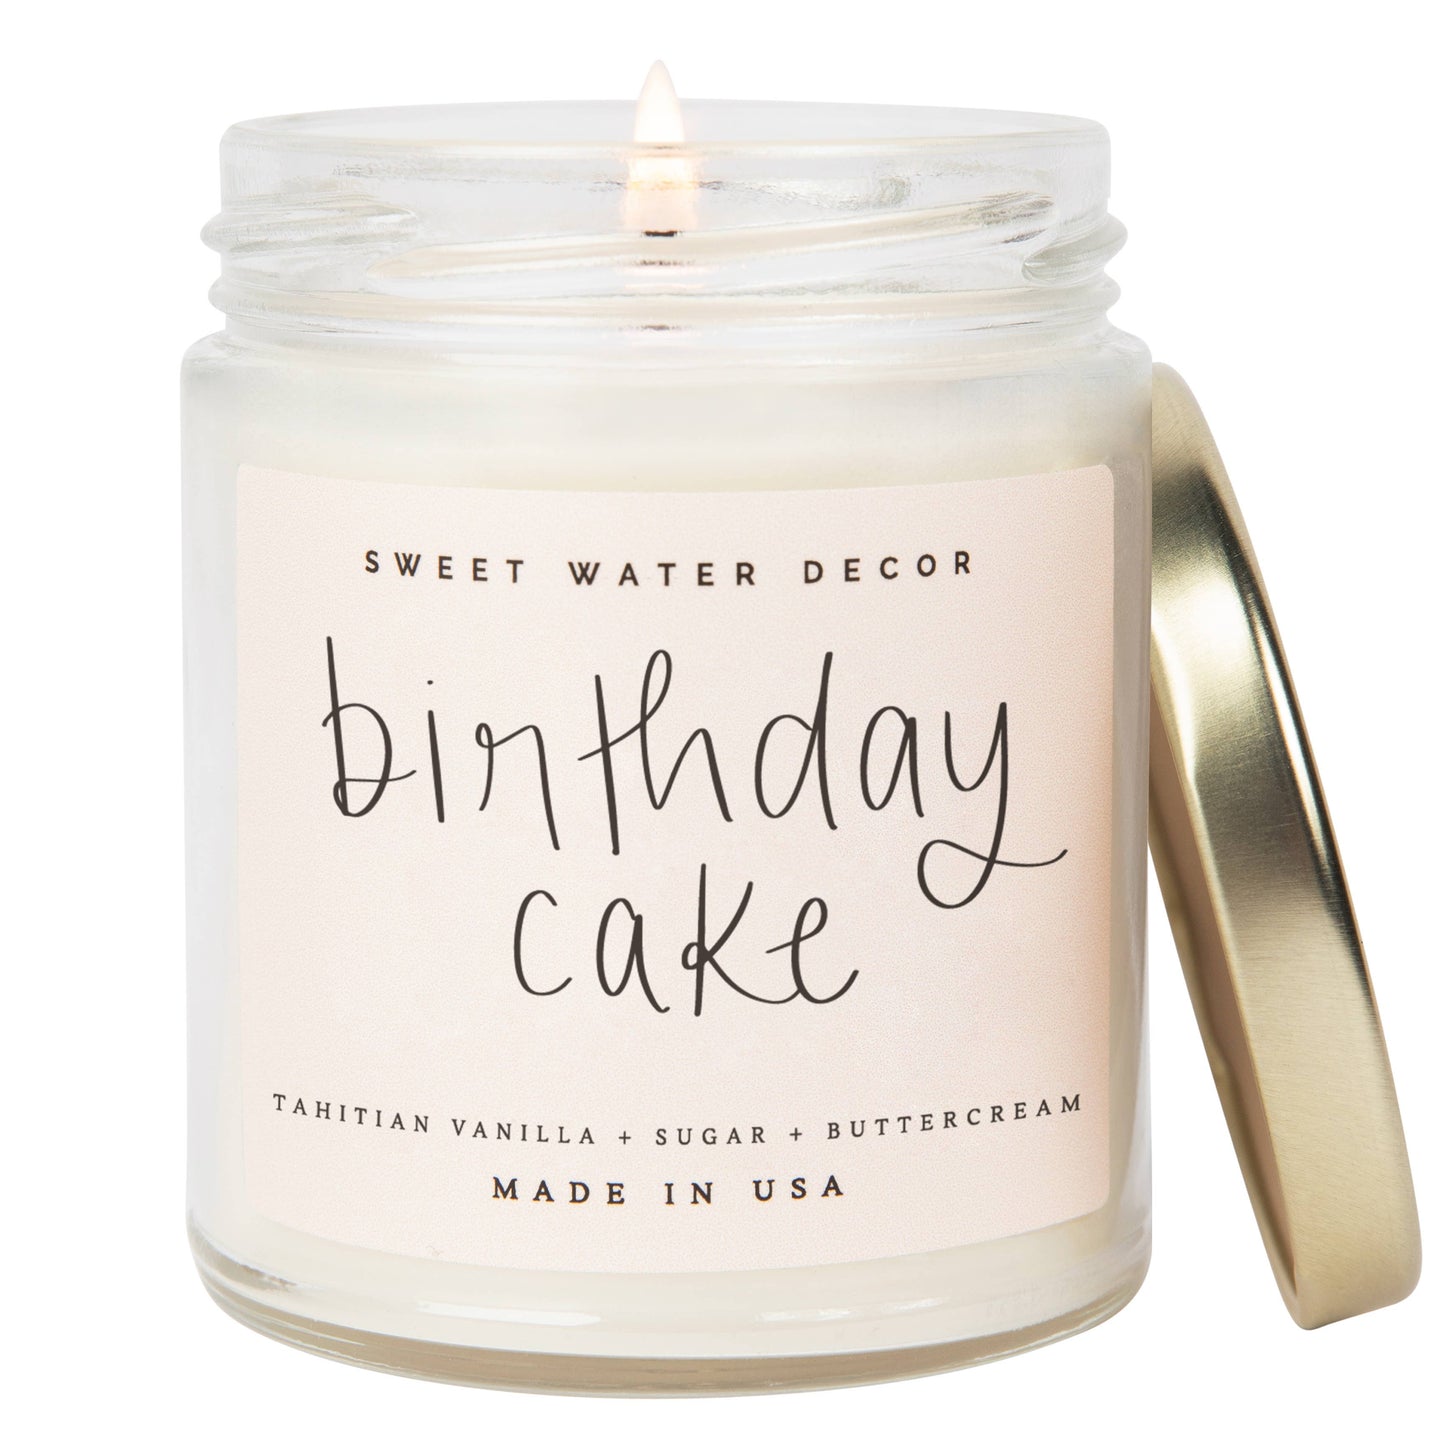 Birthday Cake 9 oz Soy Candle - Home Decor & Gifts